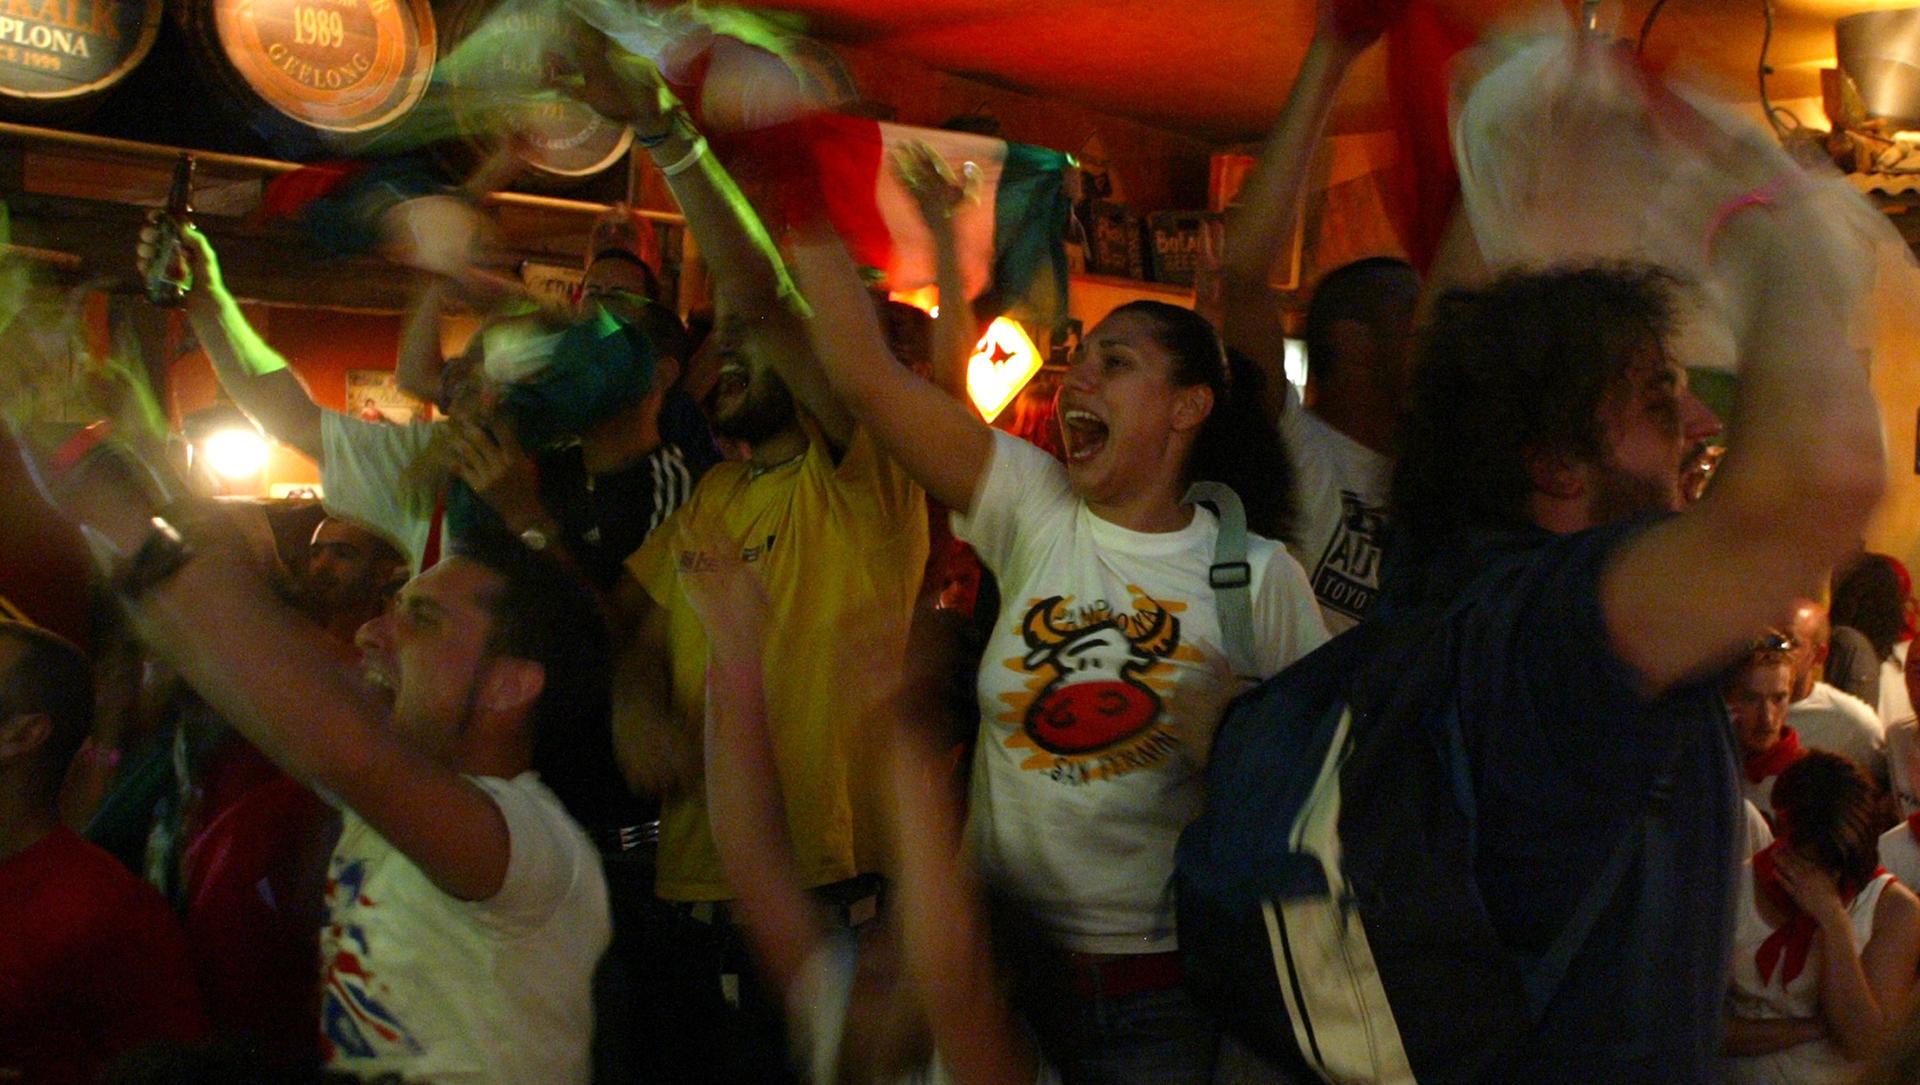 Italian fans celebrate the victory of Italy against France in the World Cup 2006 final soccer match, 2006.